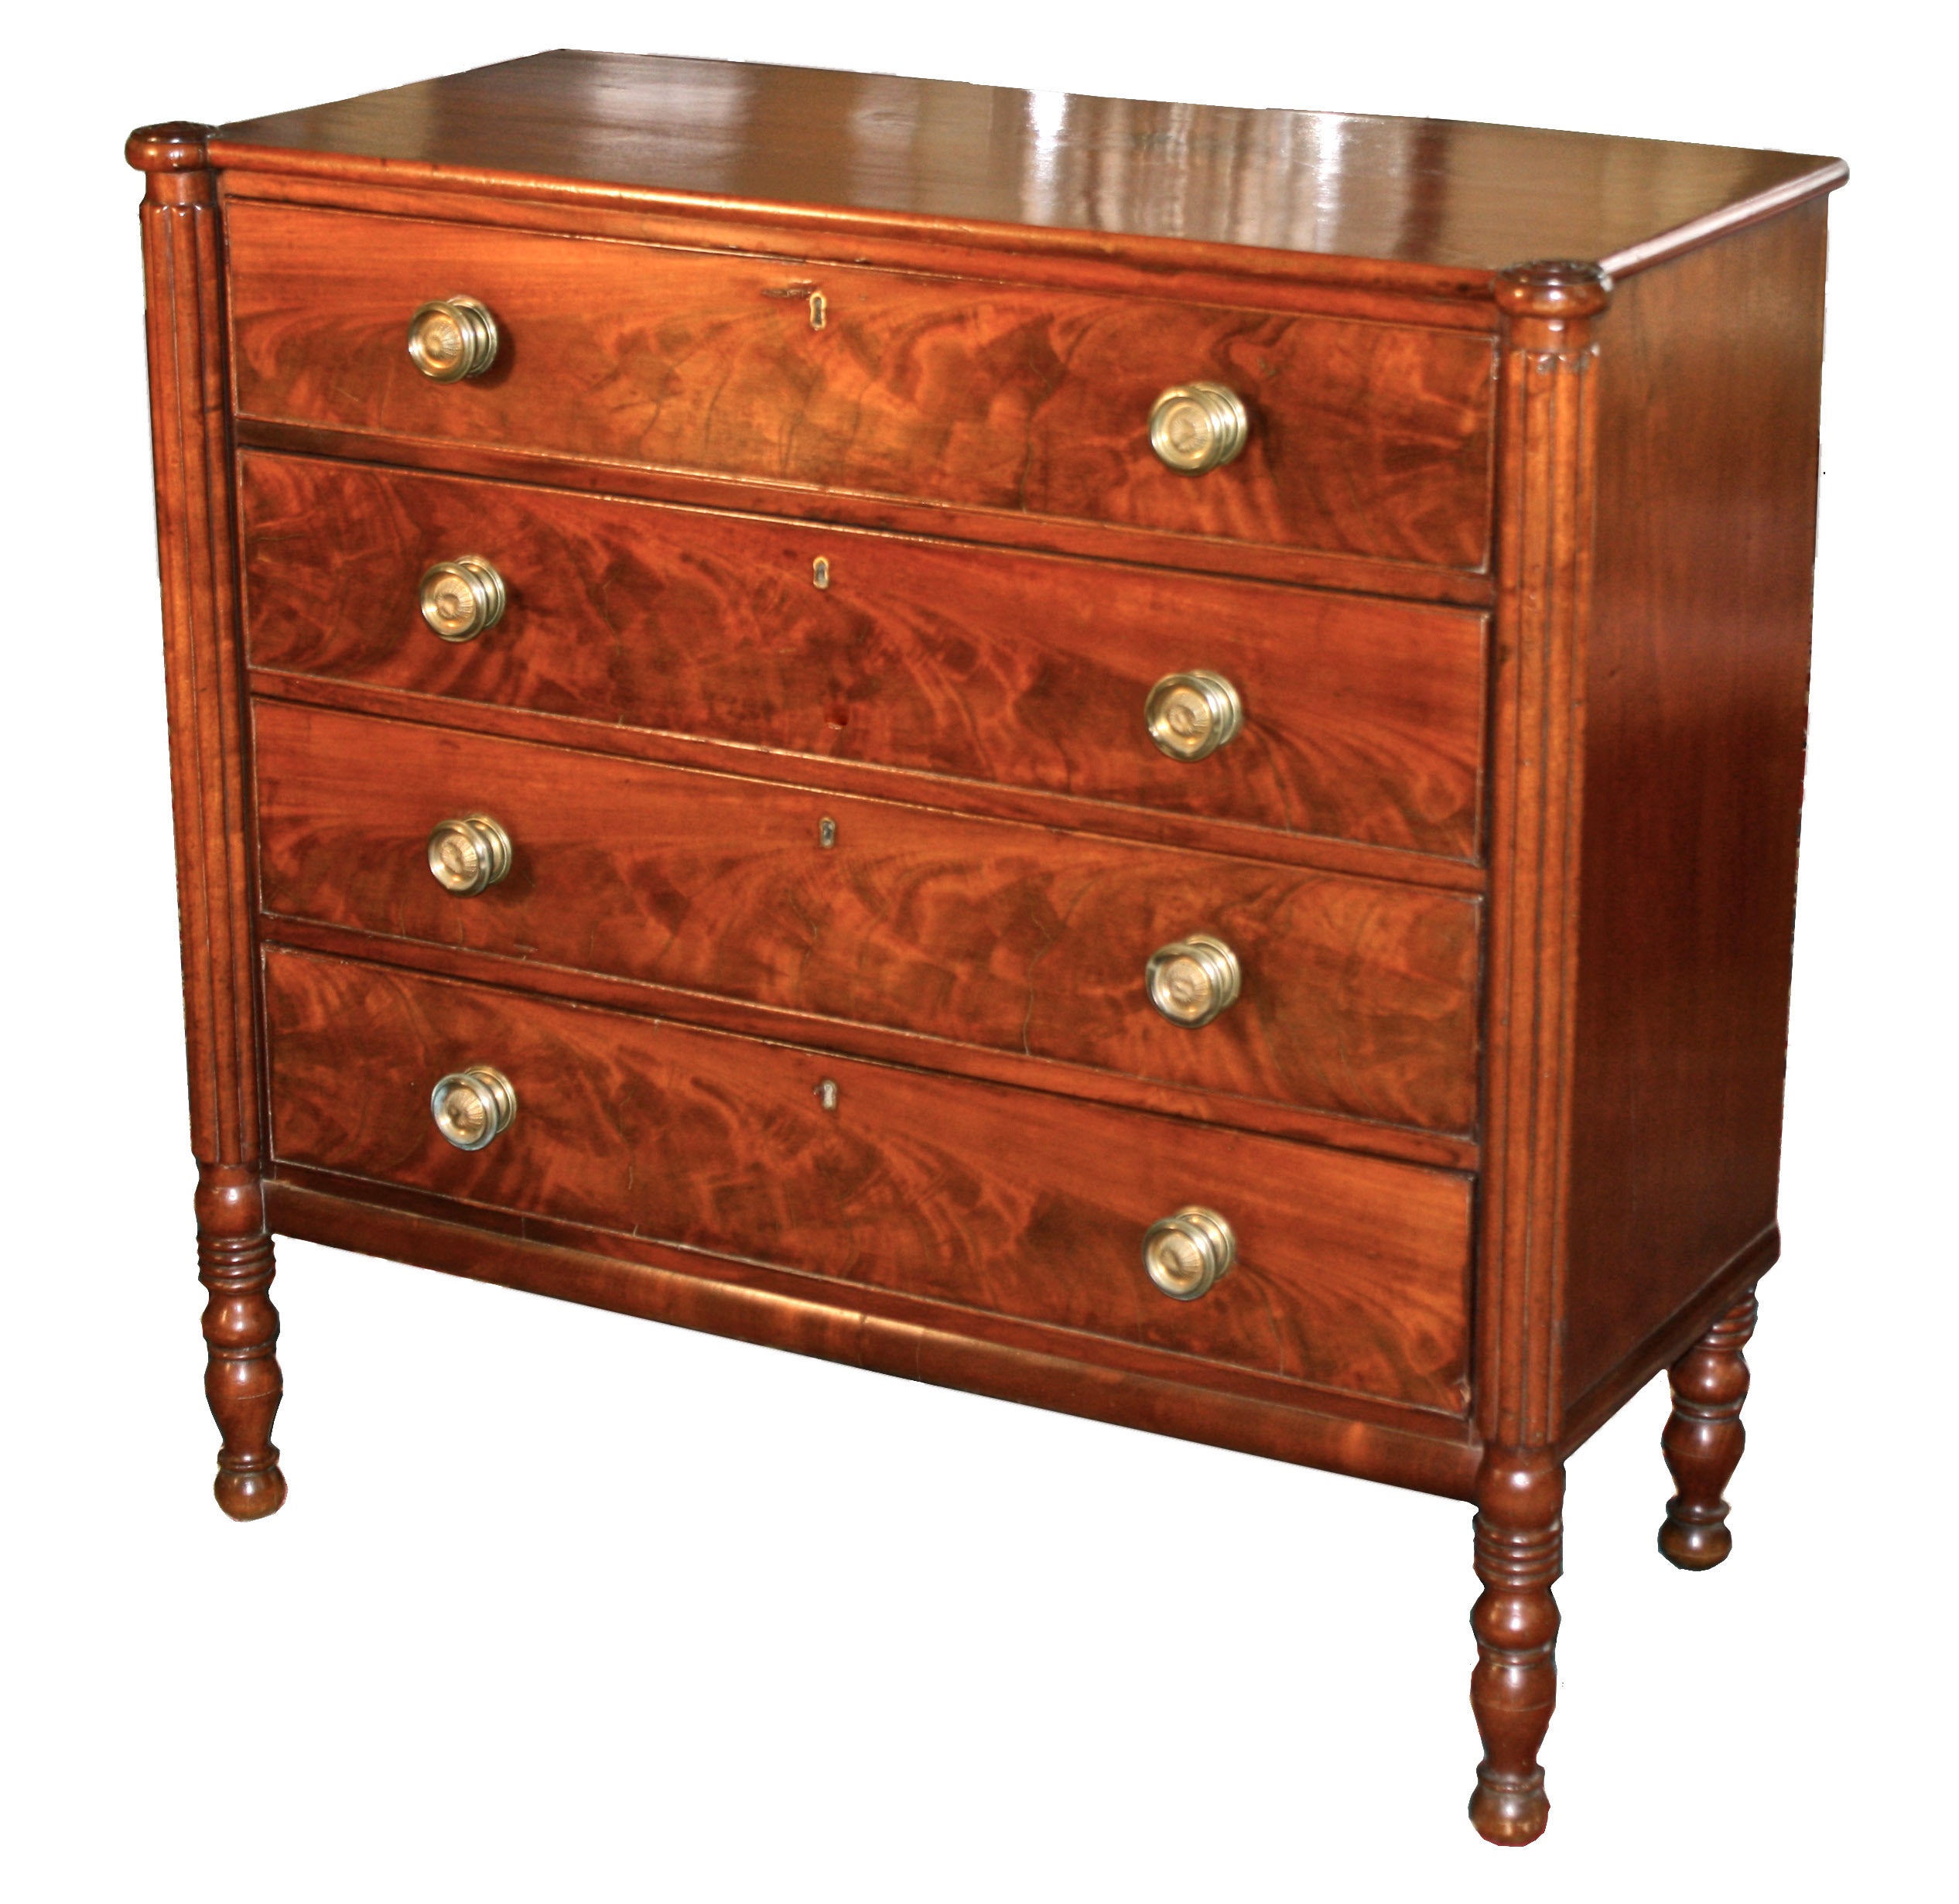 Salem Massachusetts Late Federal Period Chest of Drawers